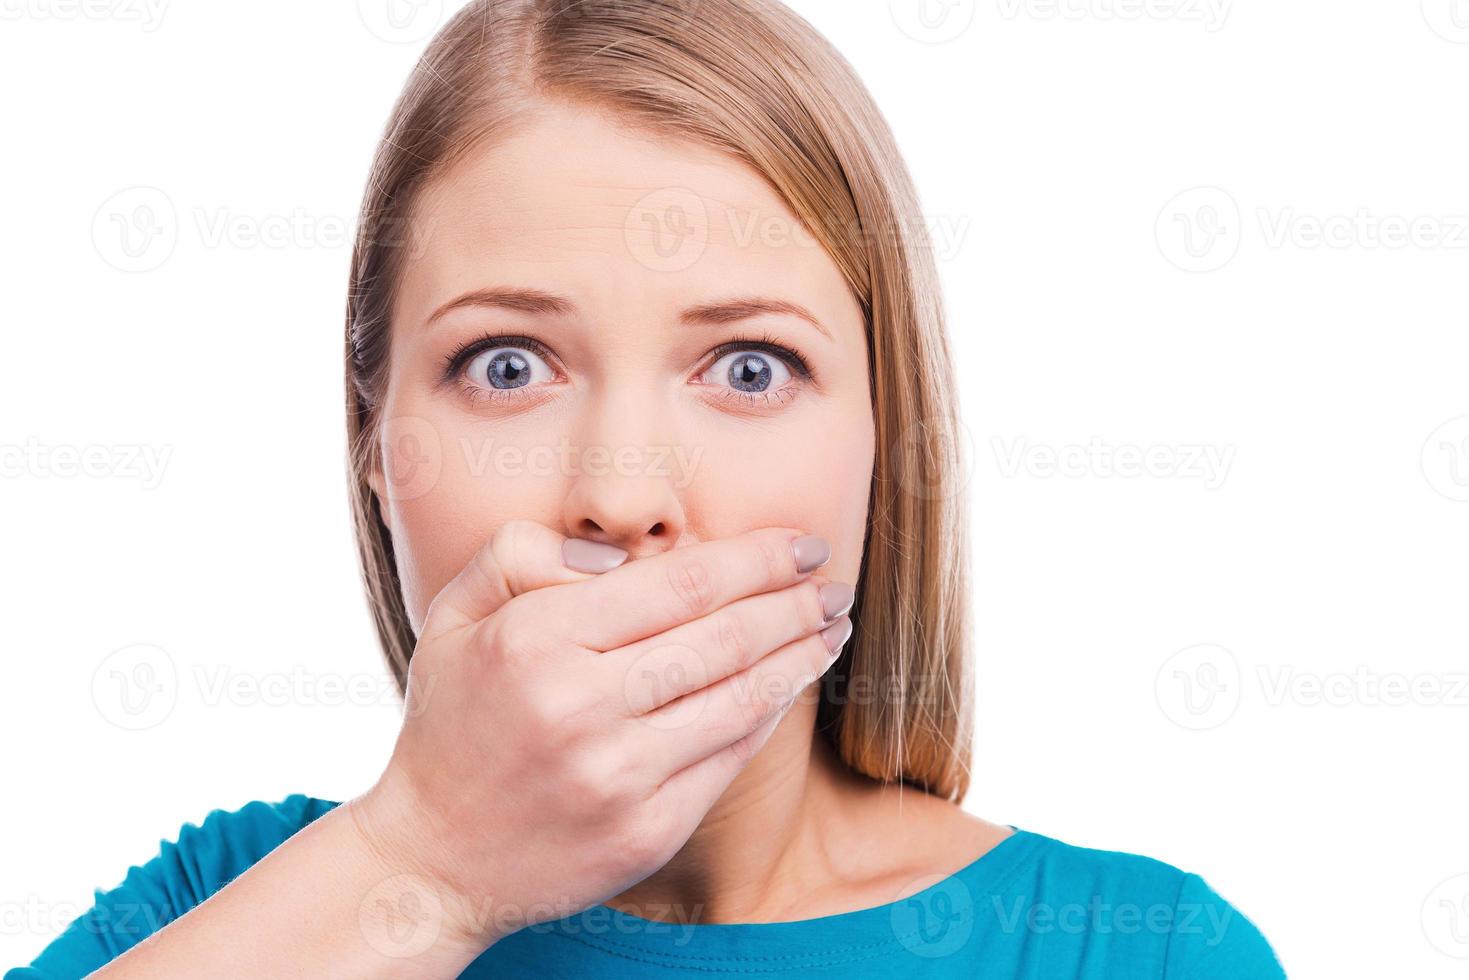 Oops Surprised young woman covering mouth with hand and staring at camera while standing against white background photo